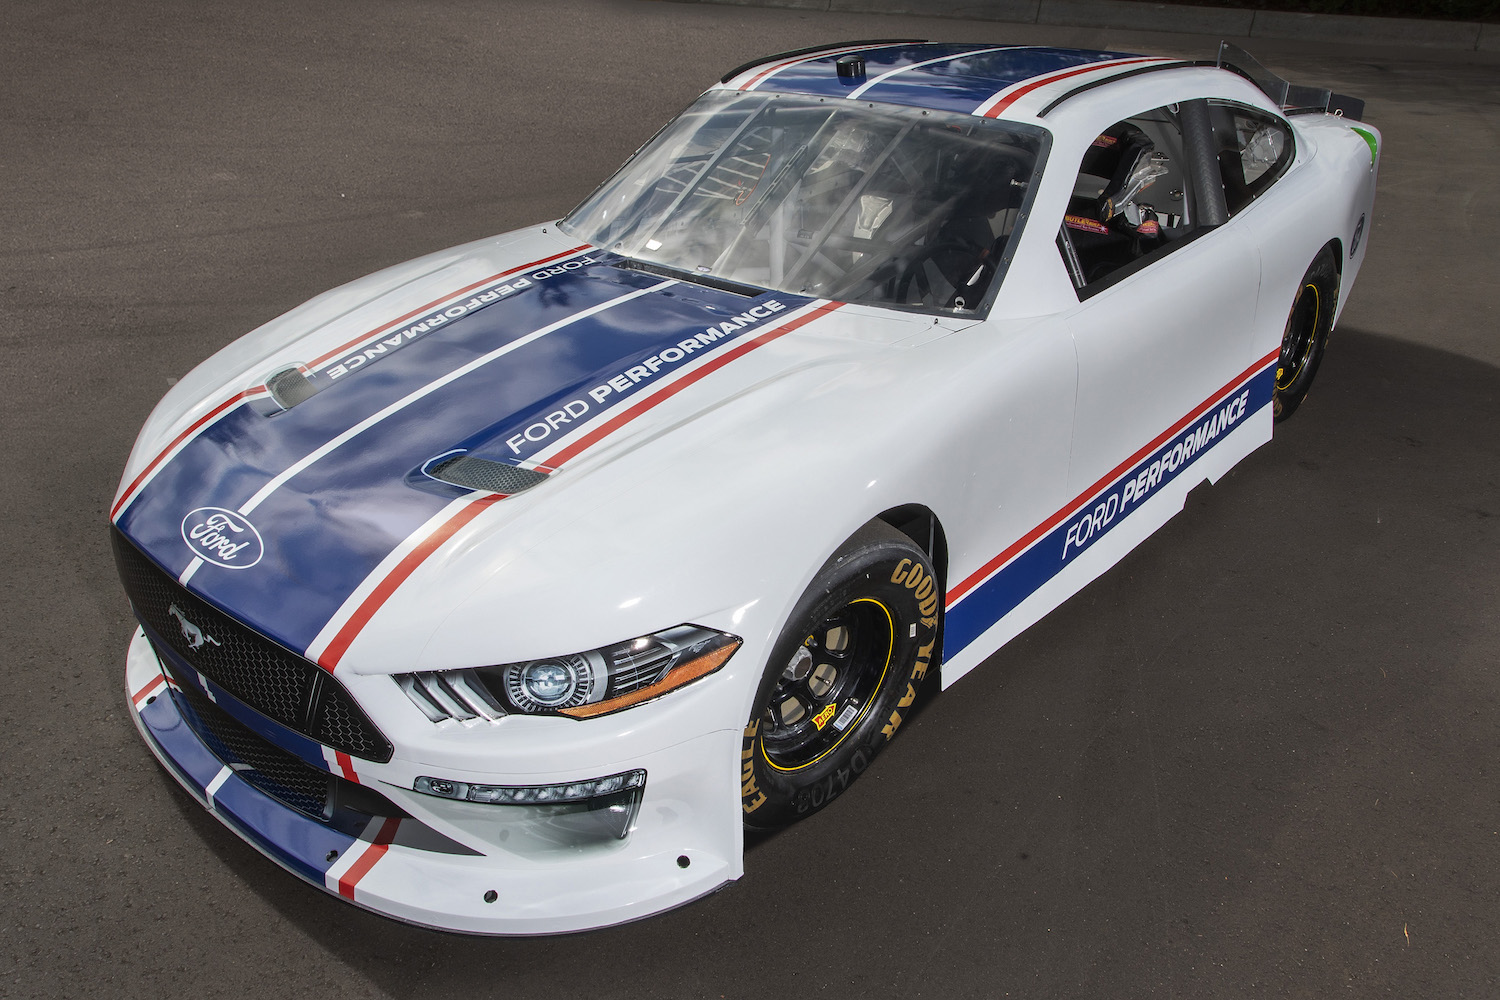 Ford Perfomance has teased the Next-Gen Mustang NASCAR in a new clip at Martinsville Speedway.